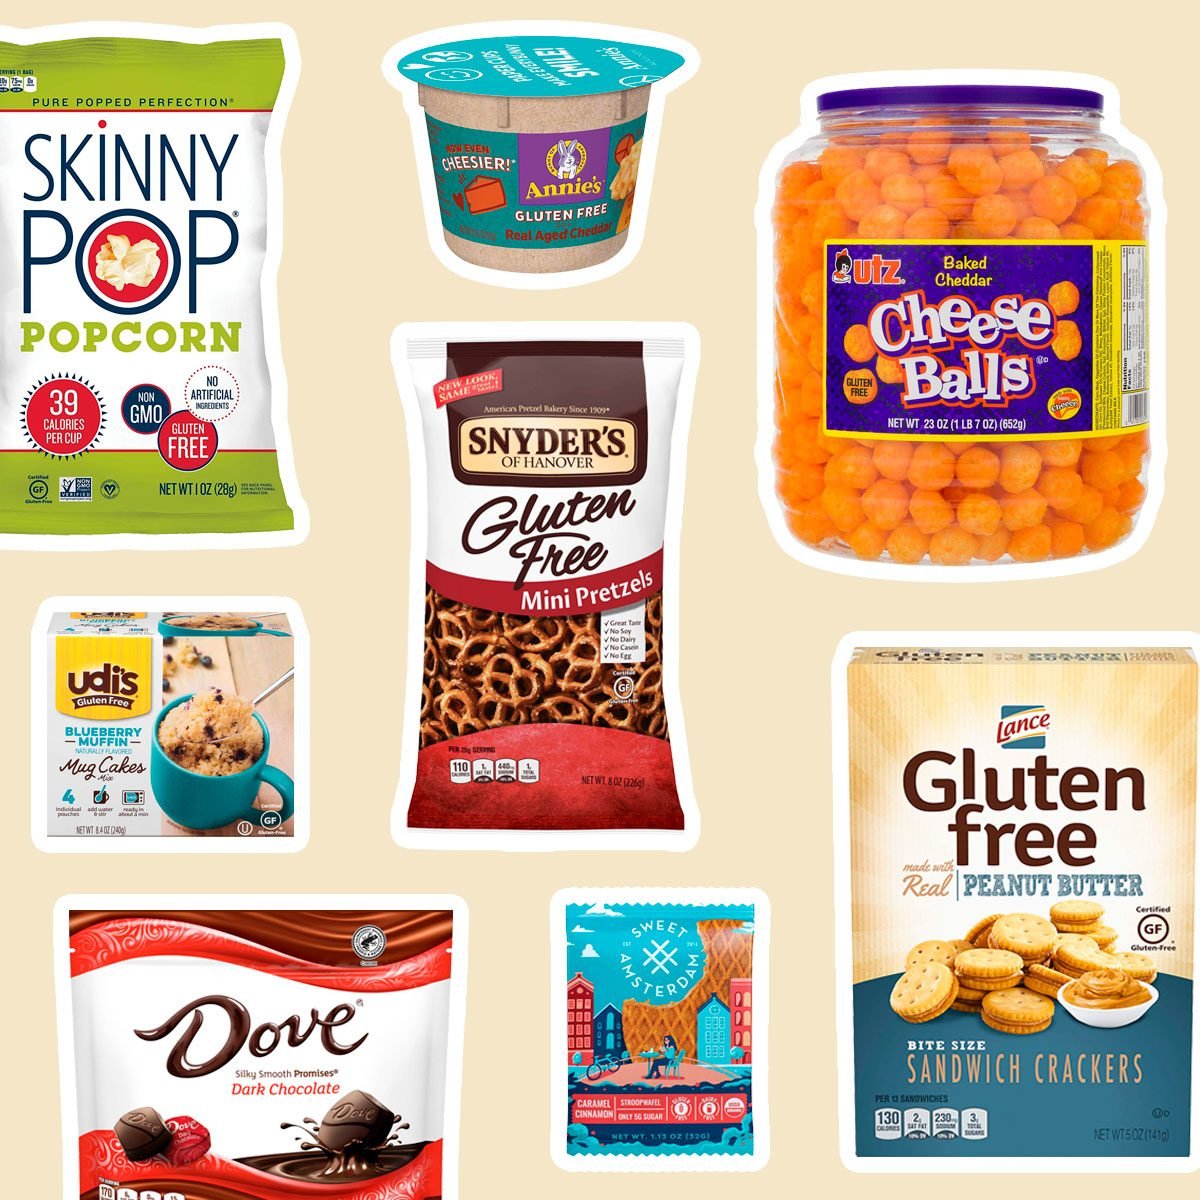 Affordable gluten-free products